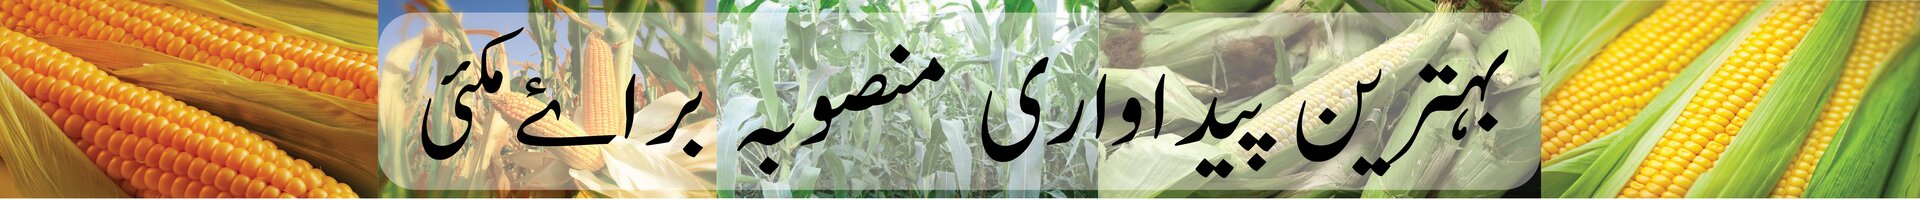 Plan for good cultivation of corn crop / Ø